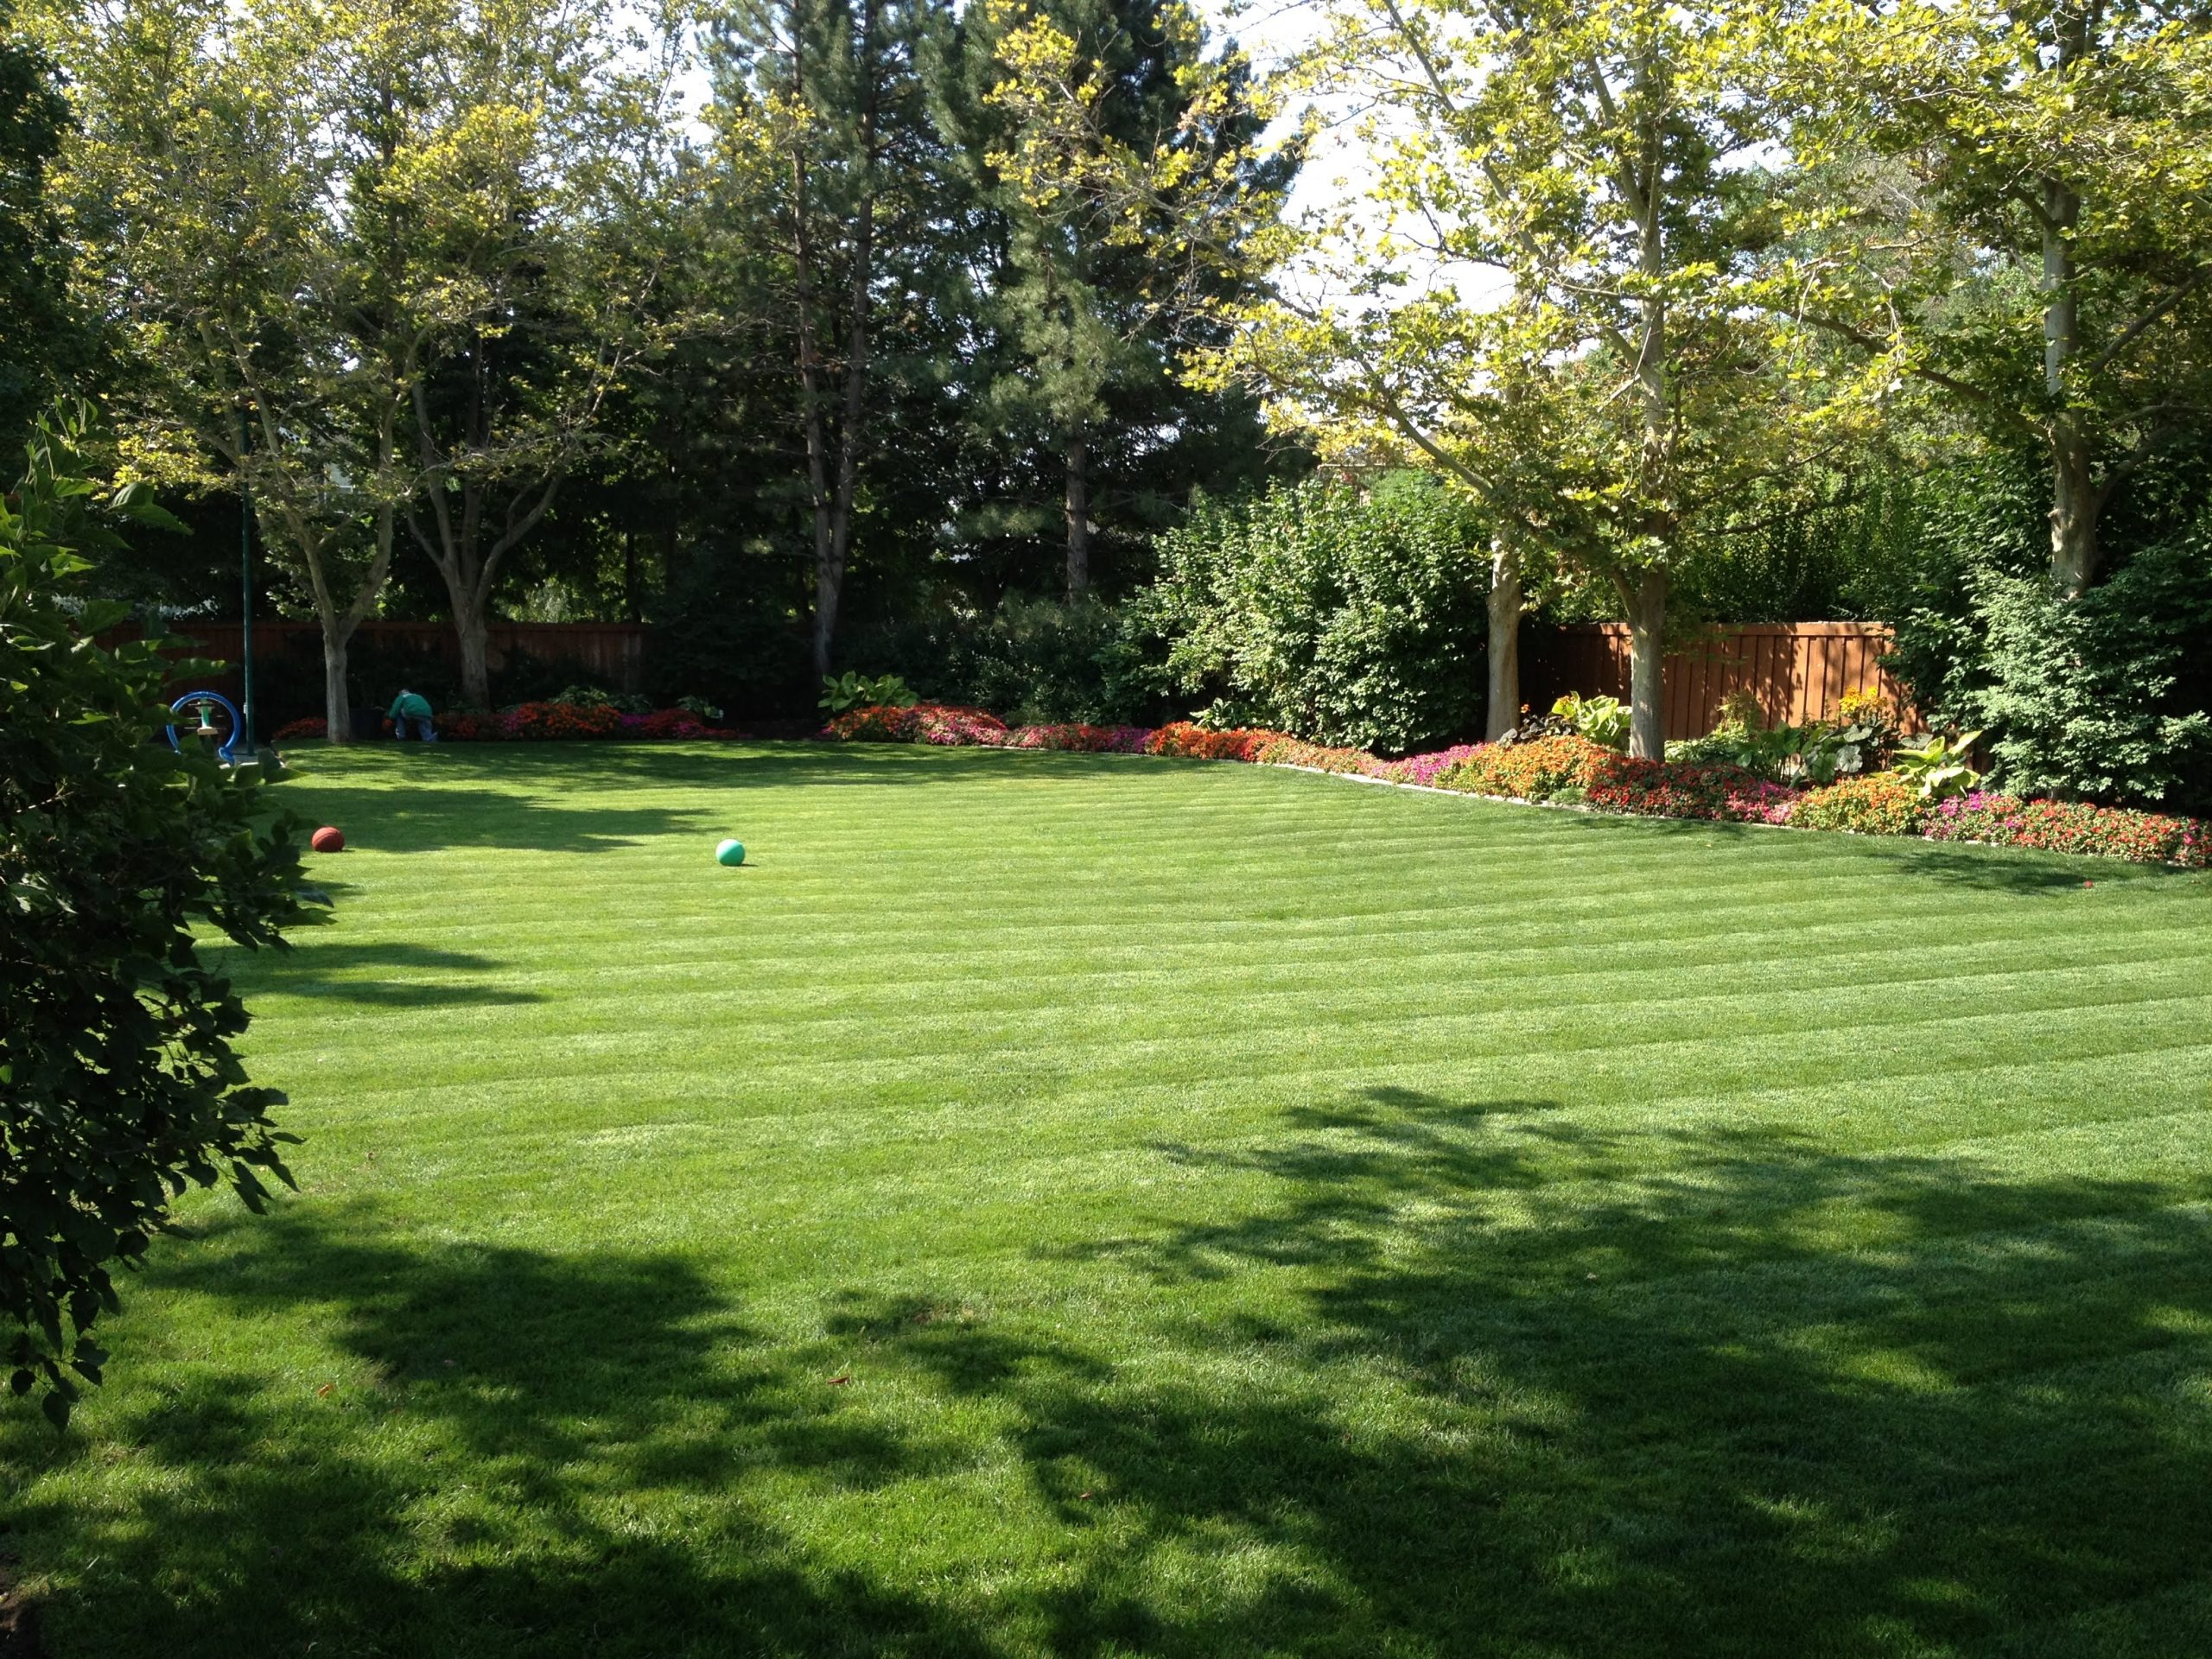 5 Simple Steps To An Effective how to landscape backyard Strategy